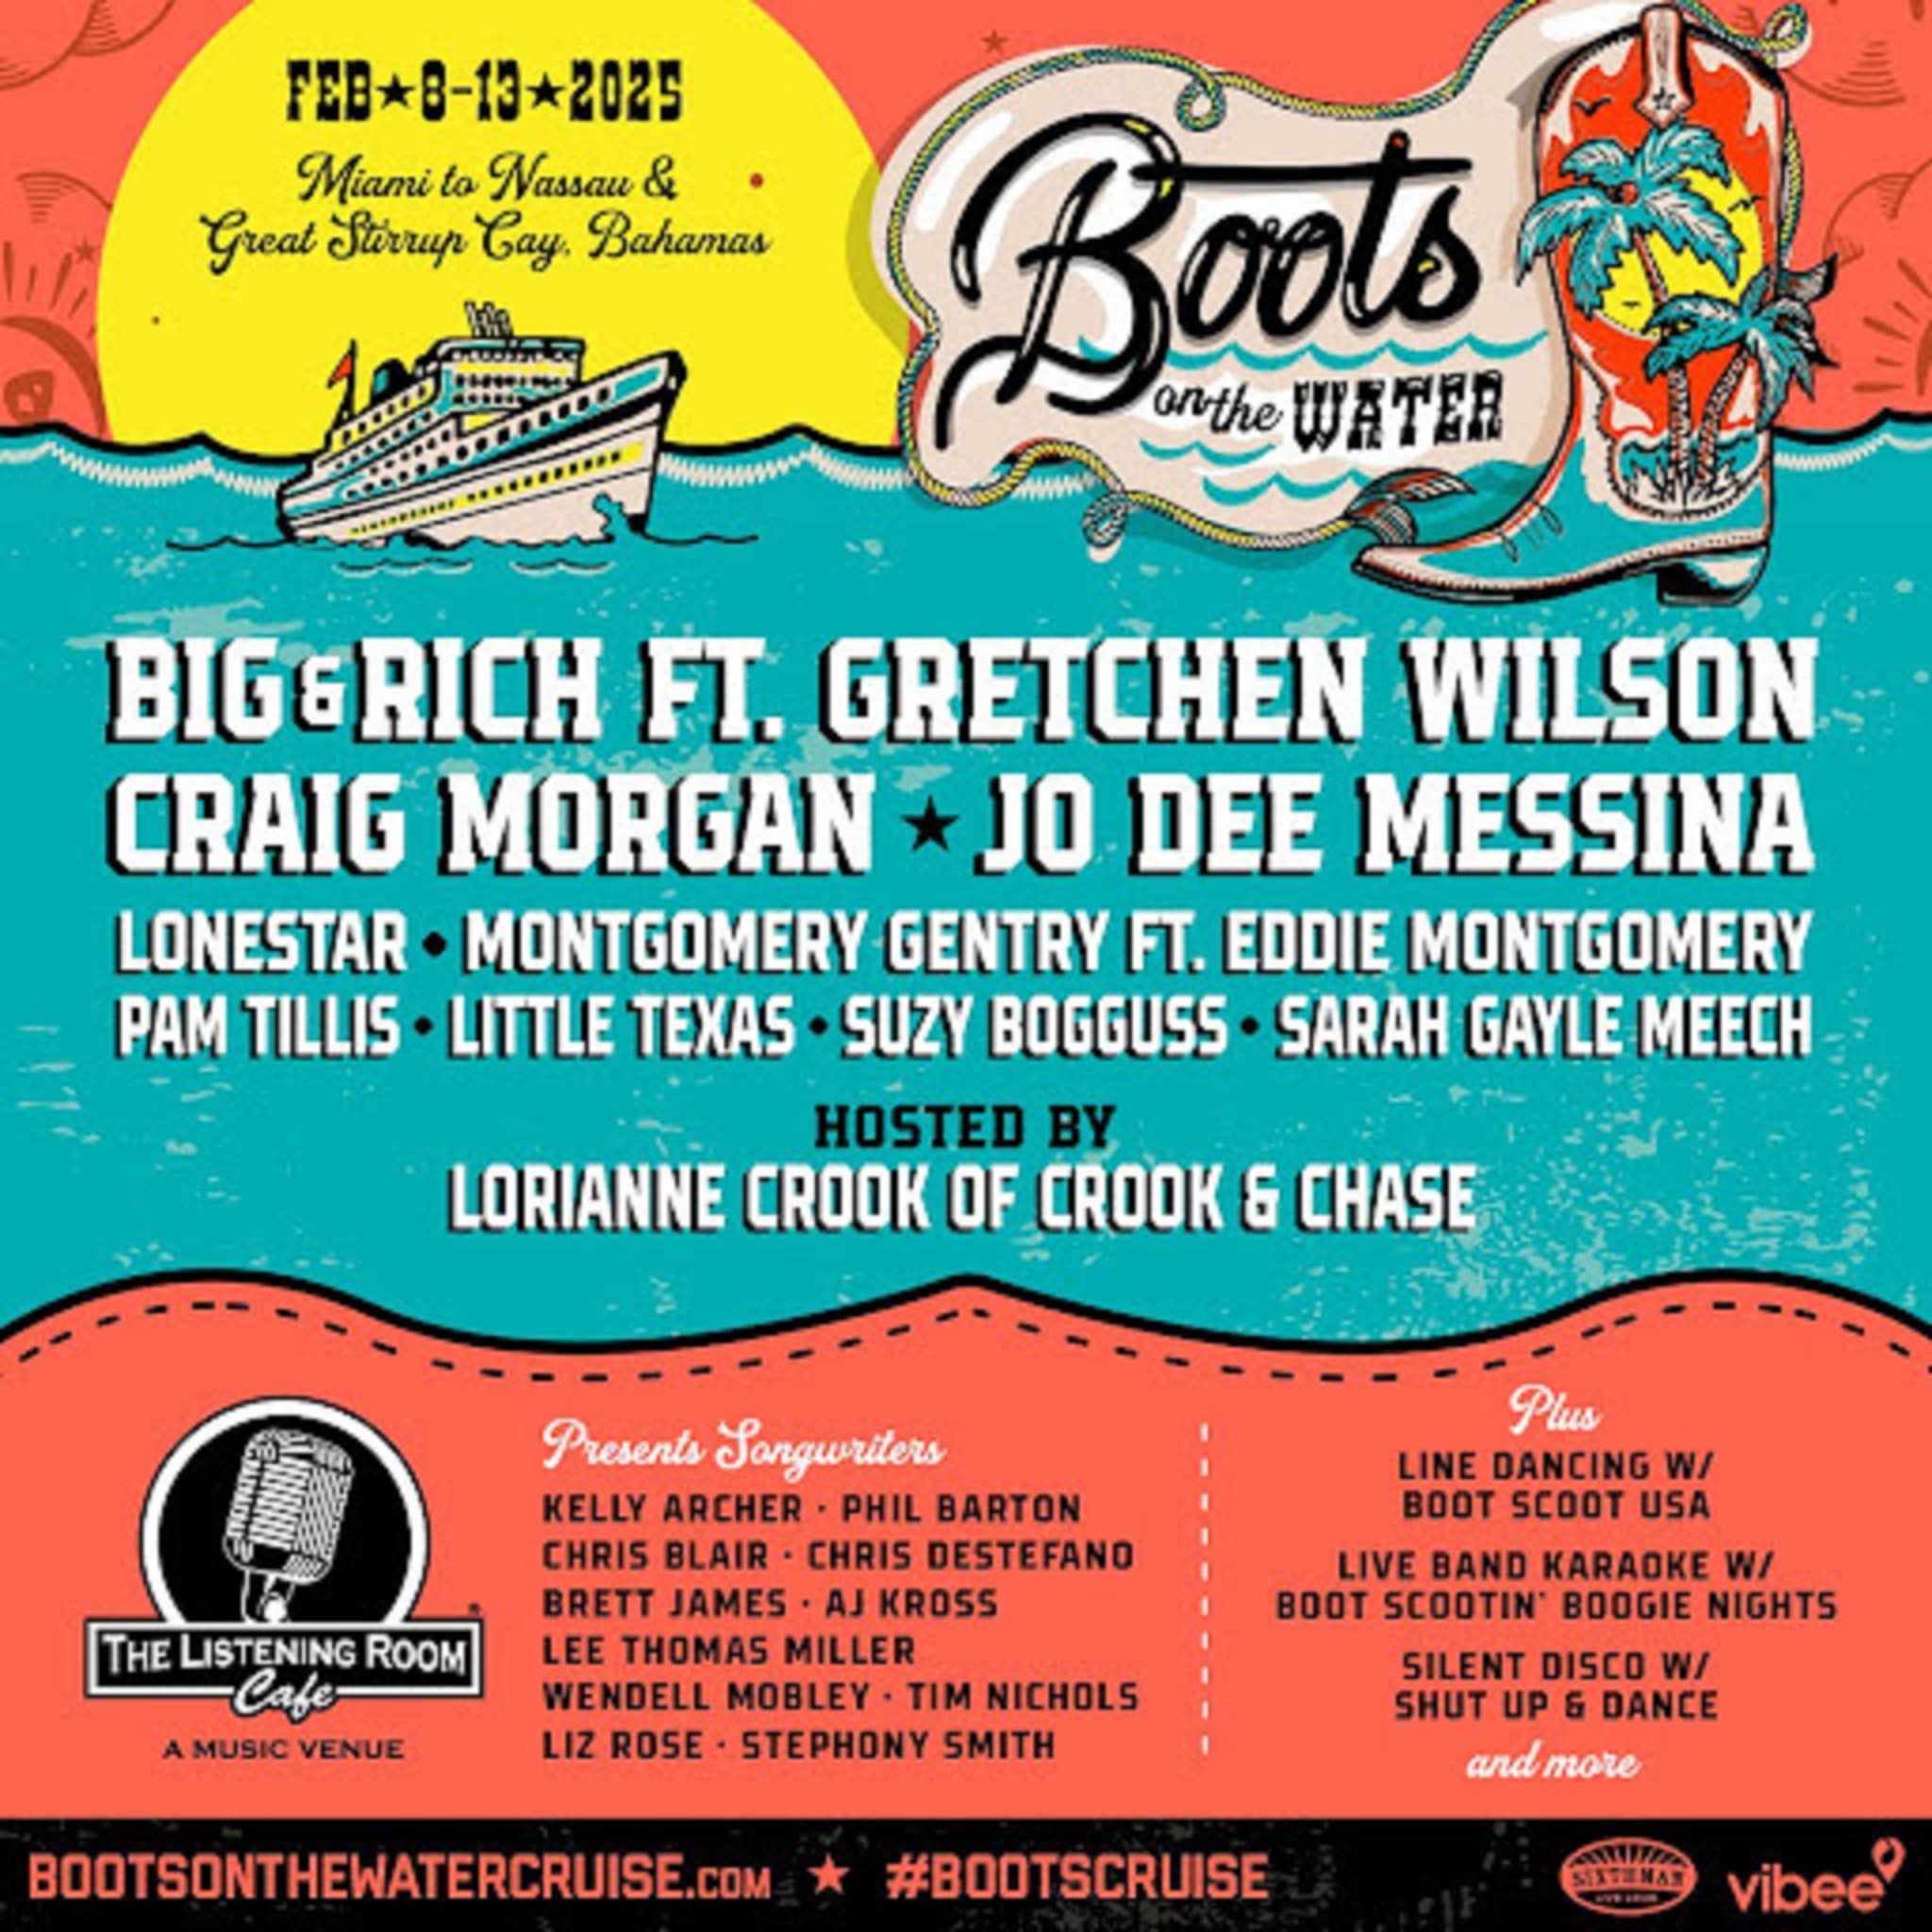 Sixthman and Vibee announce "Boots on the Water" Cruise